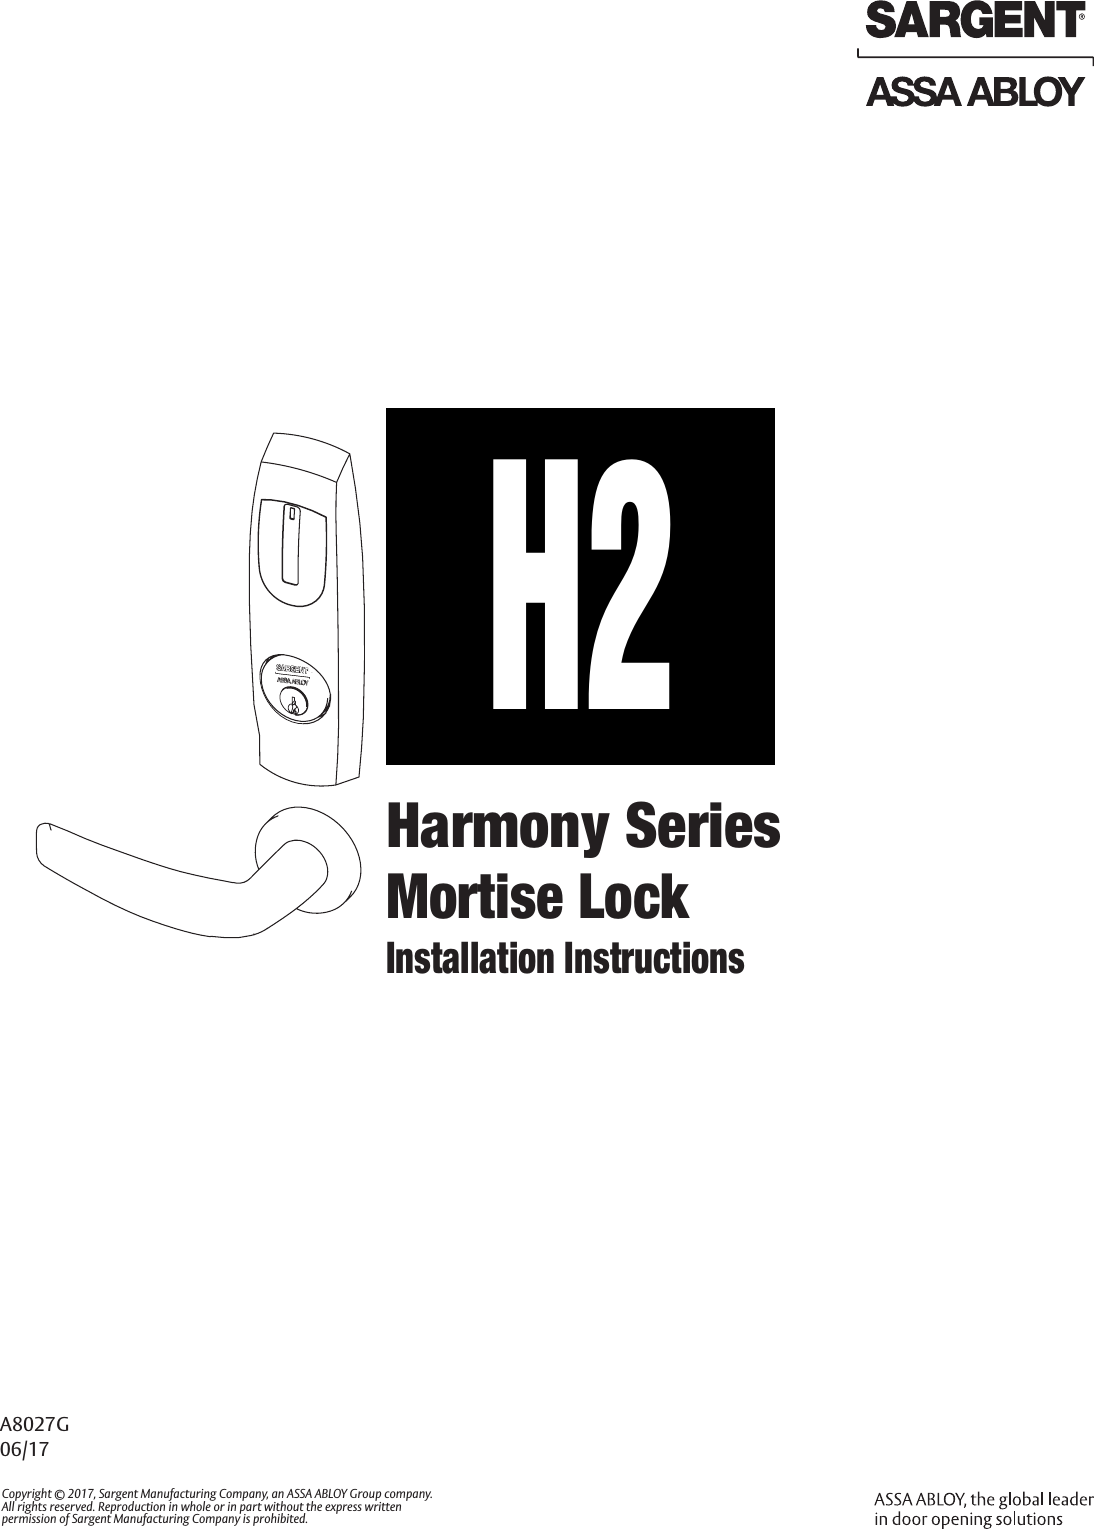 A8027G06/17Copyright © 2017, Sargent Manufacturing Company, an ASSA ABLOY Group company. All rights reserved. Reproduction in whole or in part without the express written  permission of Sargent Manufacturing Company is prohibited. Harmony Series Mortise LockInstallation InstructionsH2